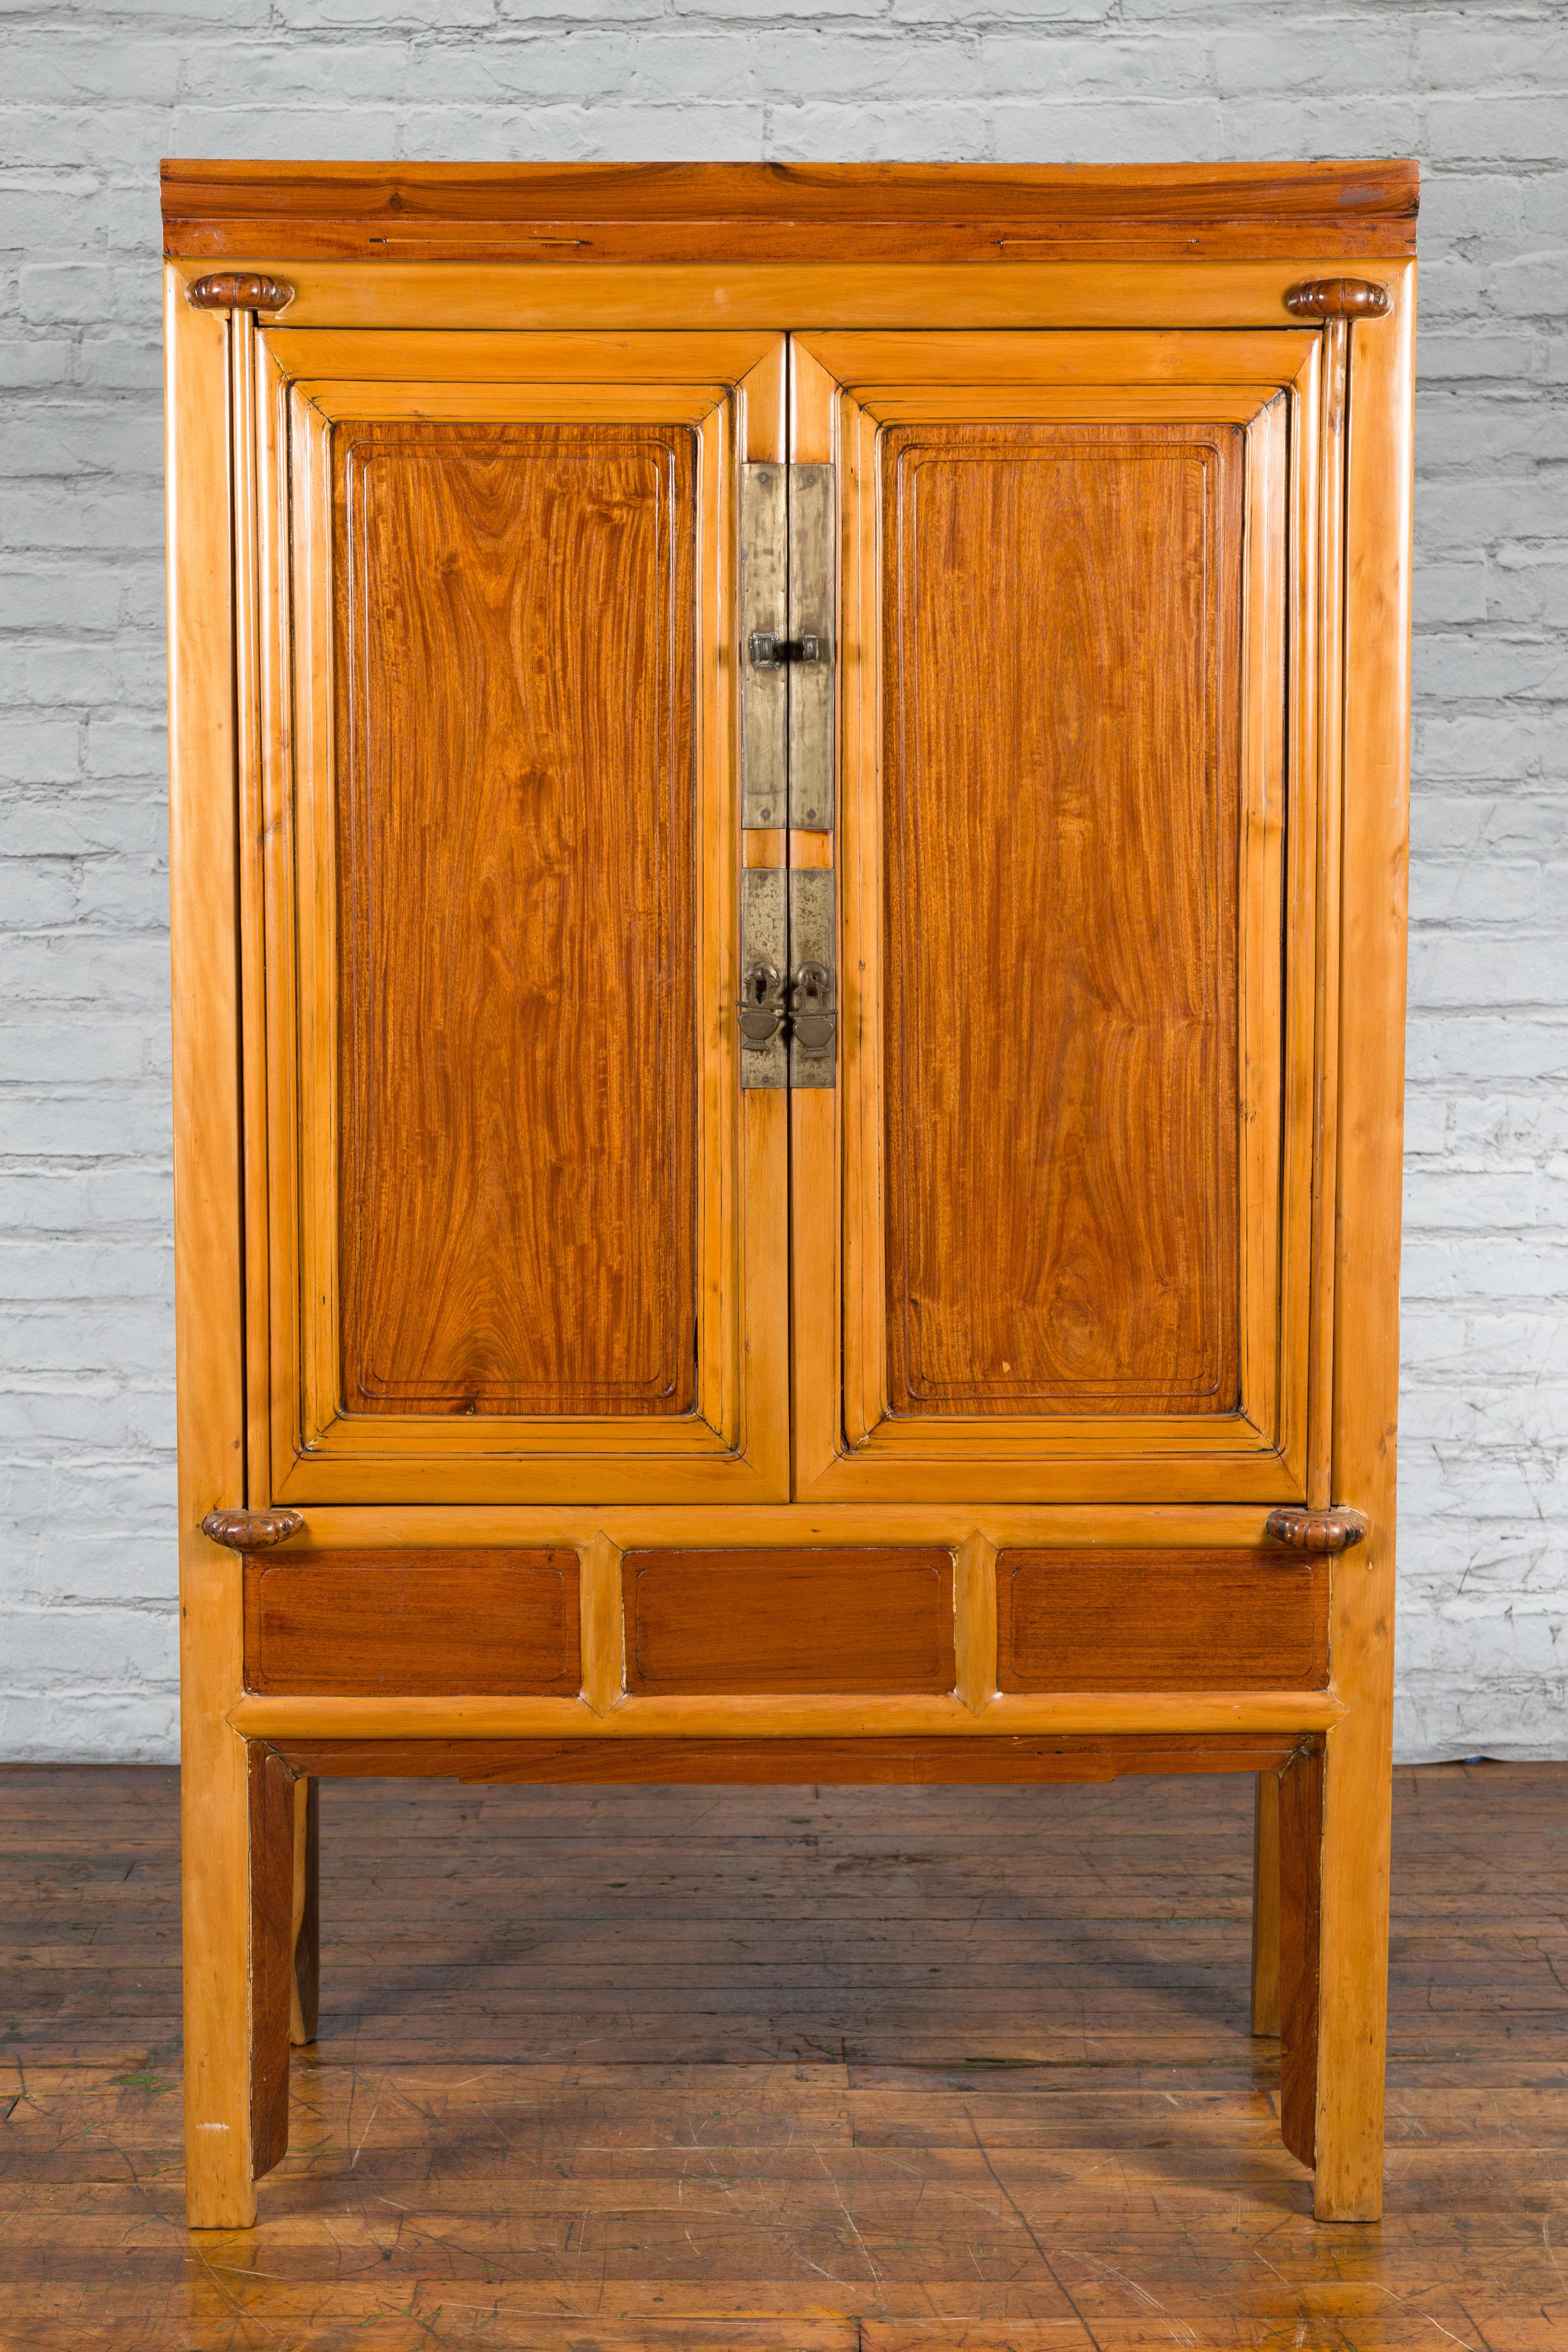 A Chinese Qing Dynasty period two-toned ningbo cypress and rosewood cabinet from the 19th century, with brass hardware. Created in China during the Qing Dynasty in the 19th century, this tall cabinet features a linear silhouette perfectly